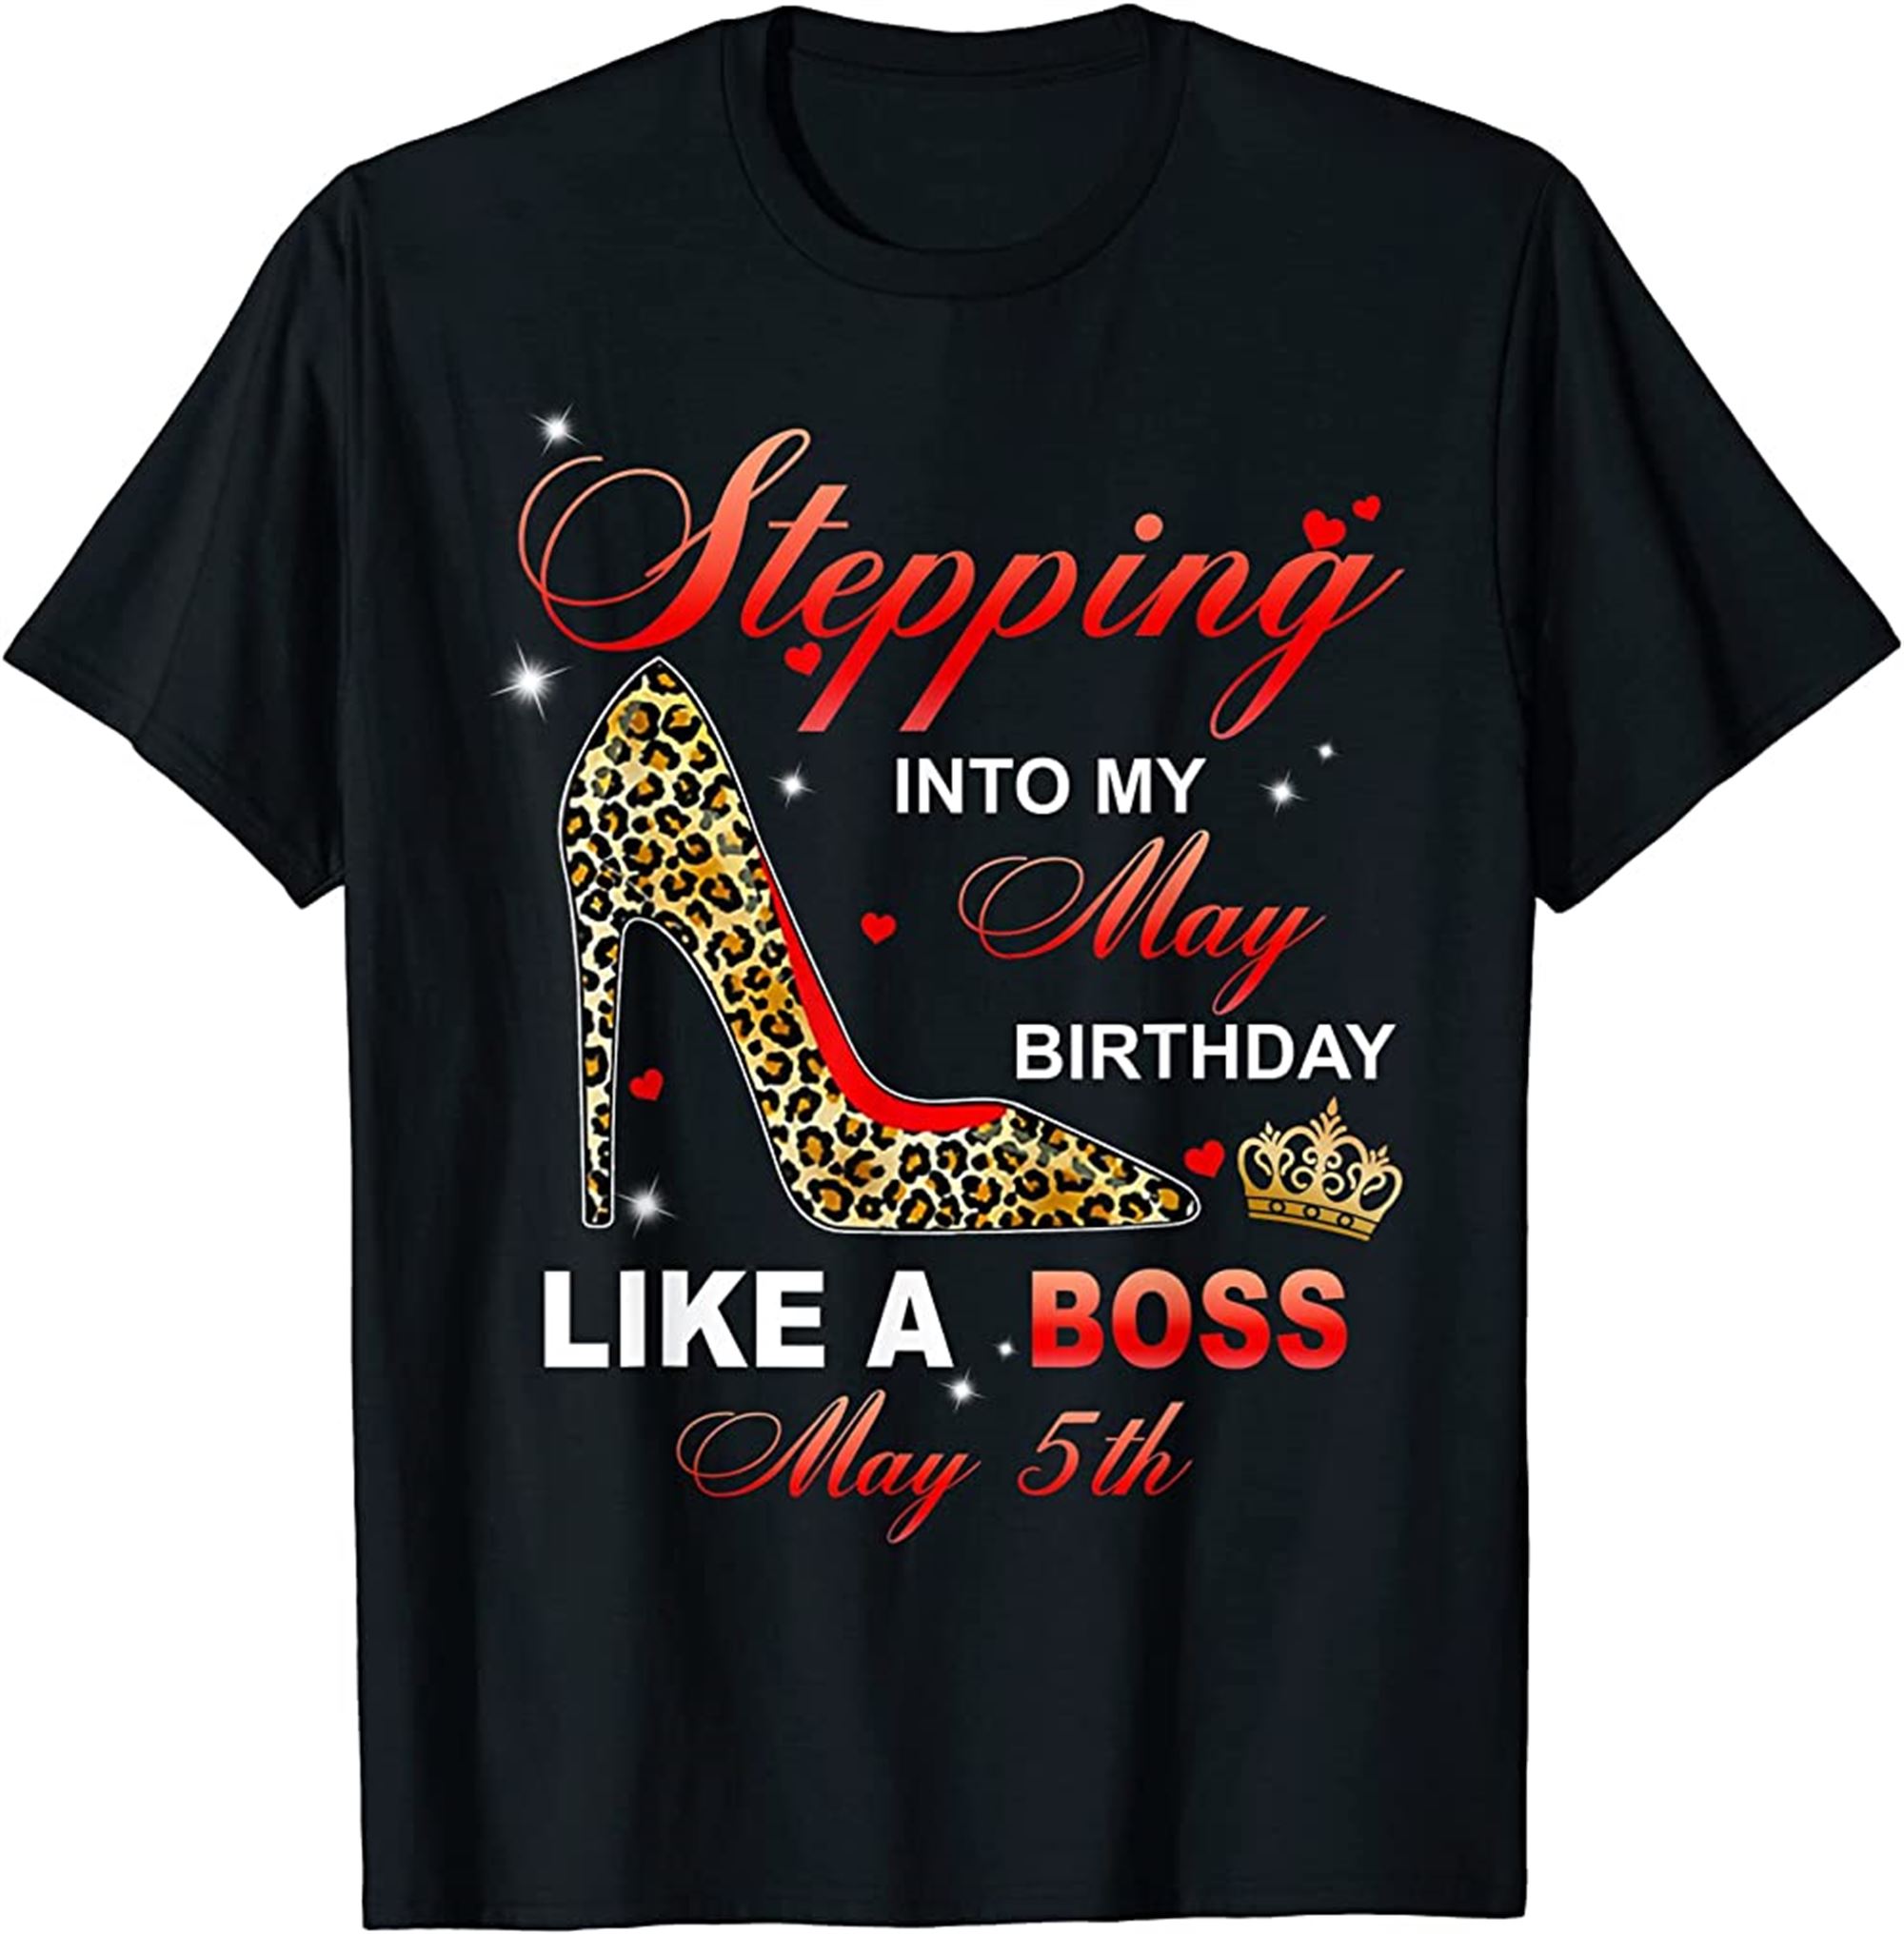 Stepping Into My May 5th Birthday Like A Boss T-shirt Full Size Up To 5xl